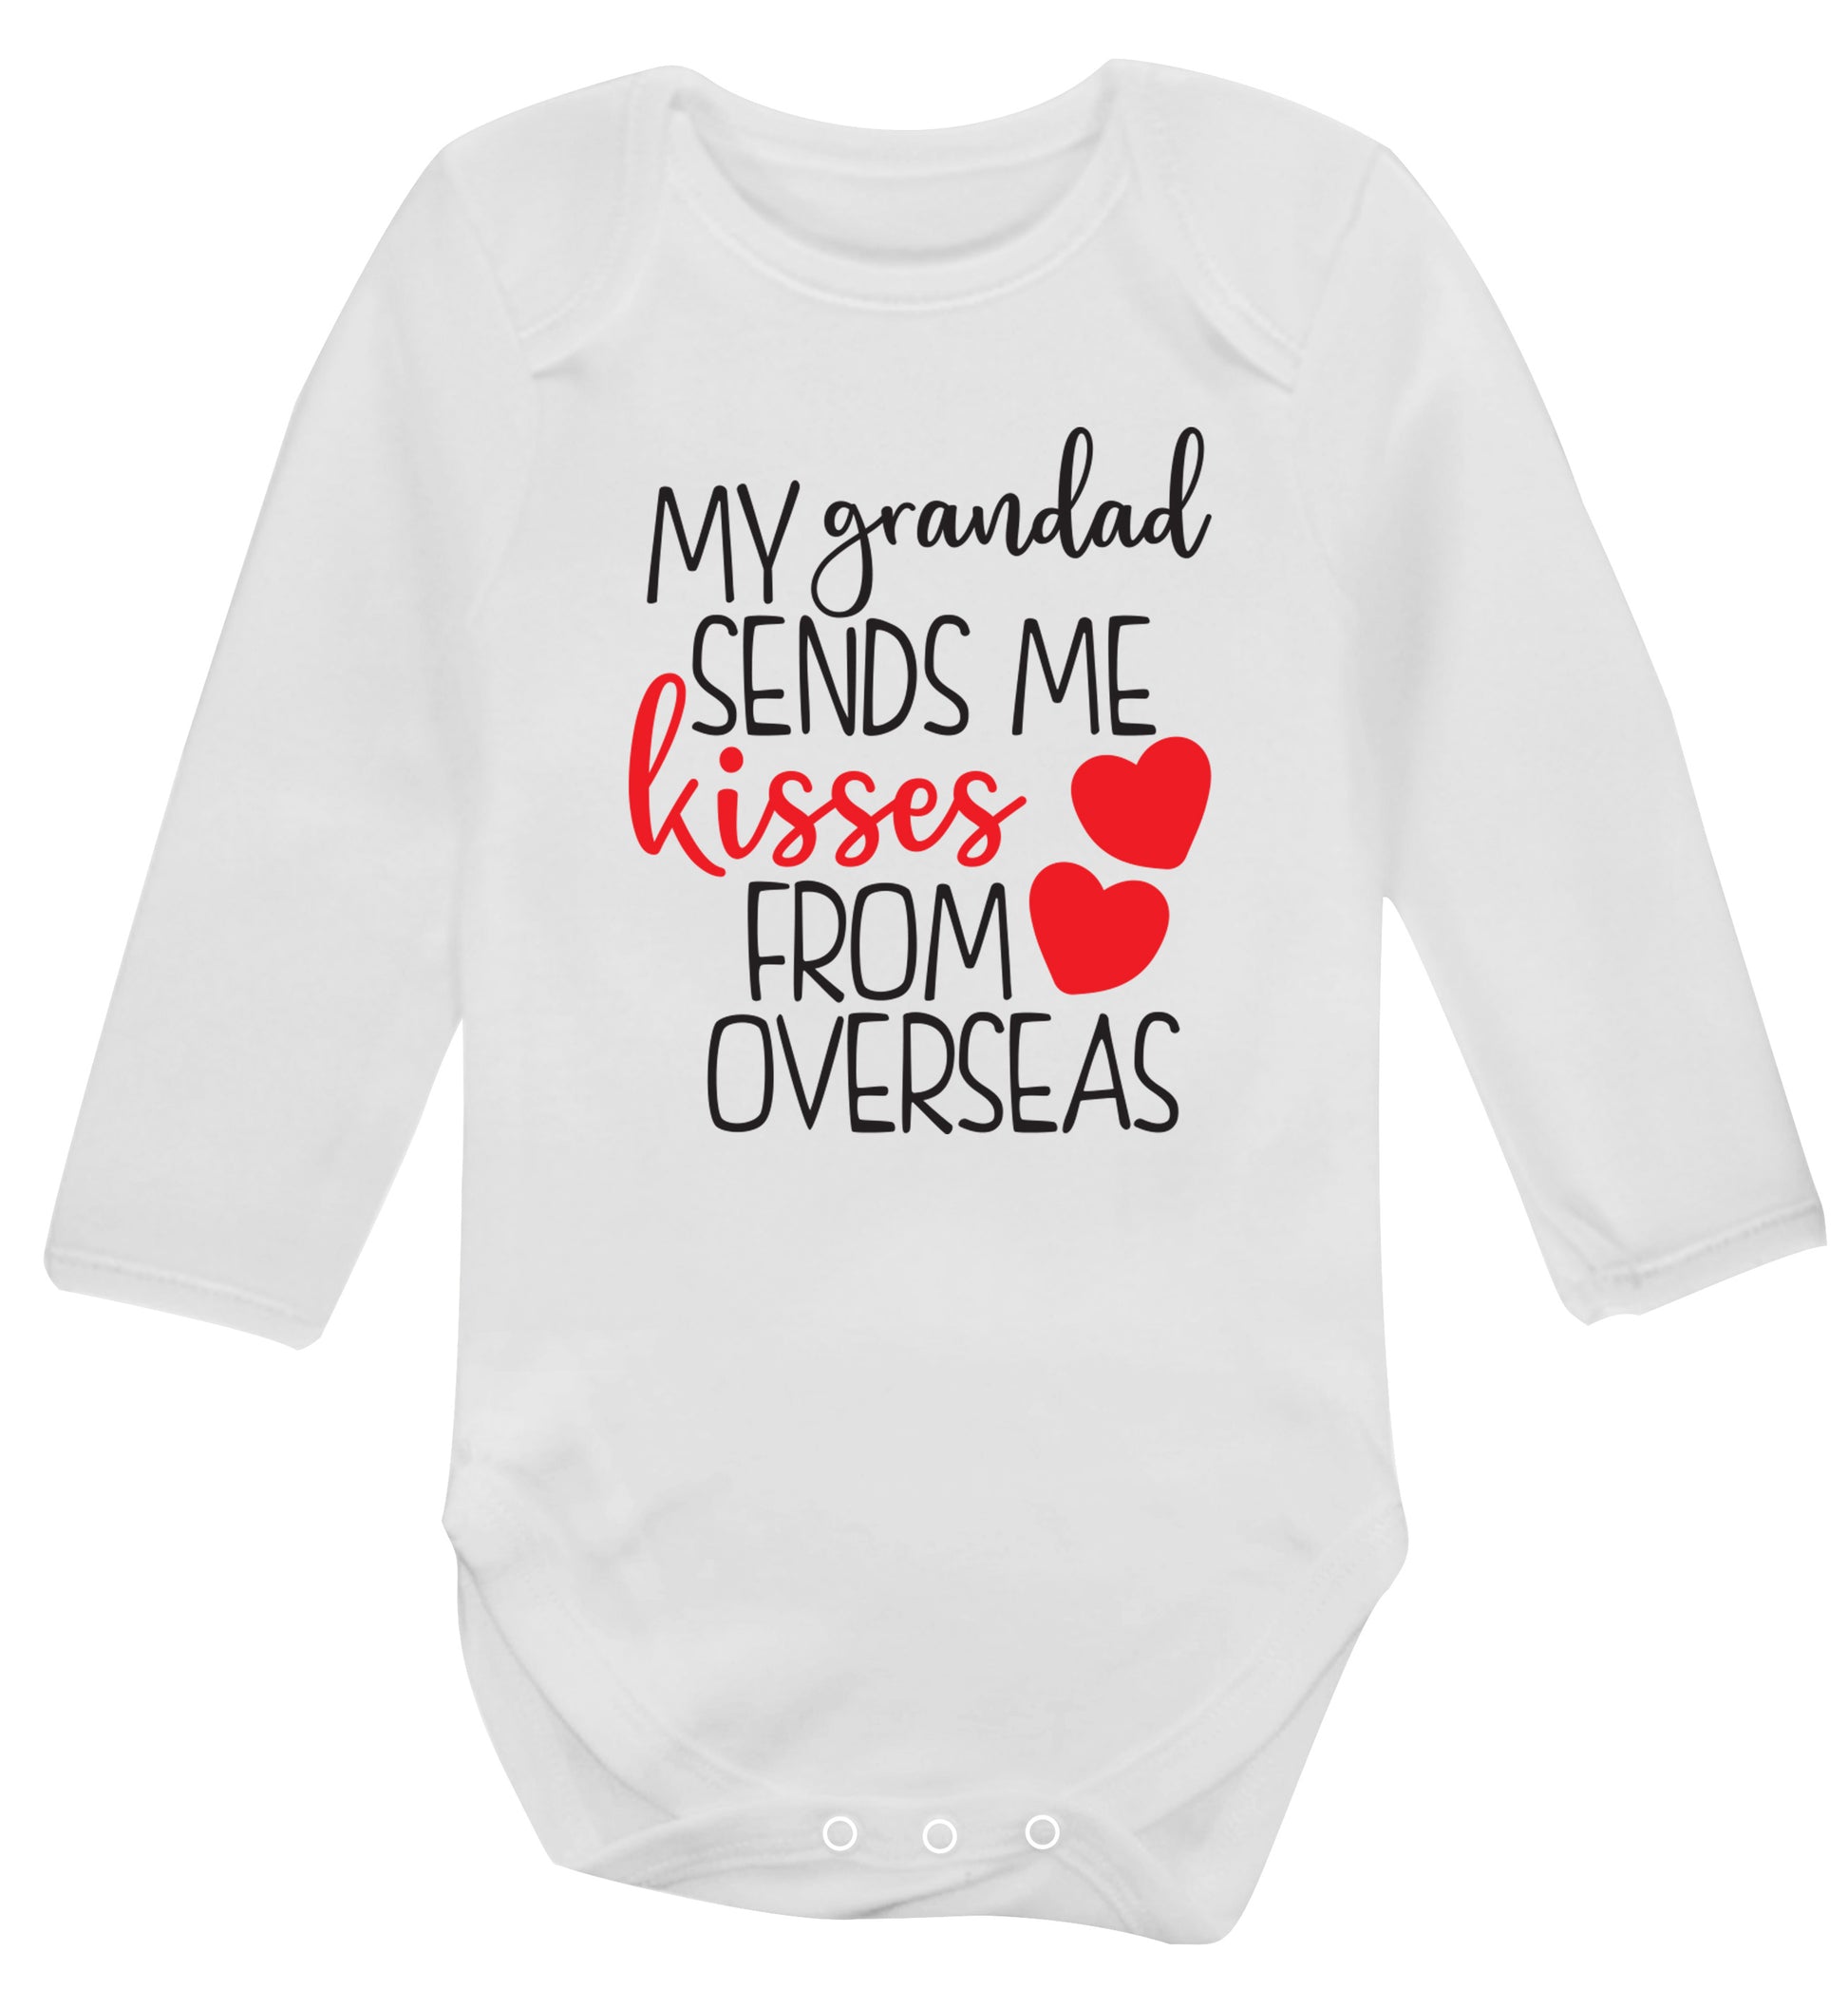 My Grandad sends me kisses from overseas Baby Vest long sleeved white 6-12 months